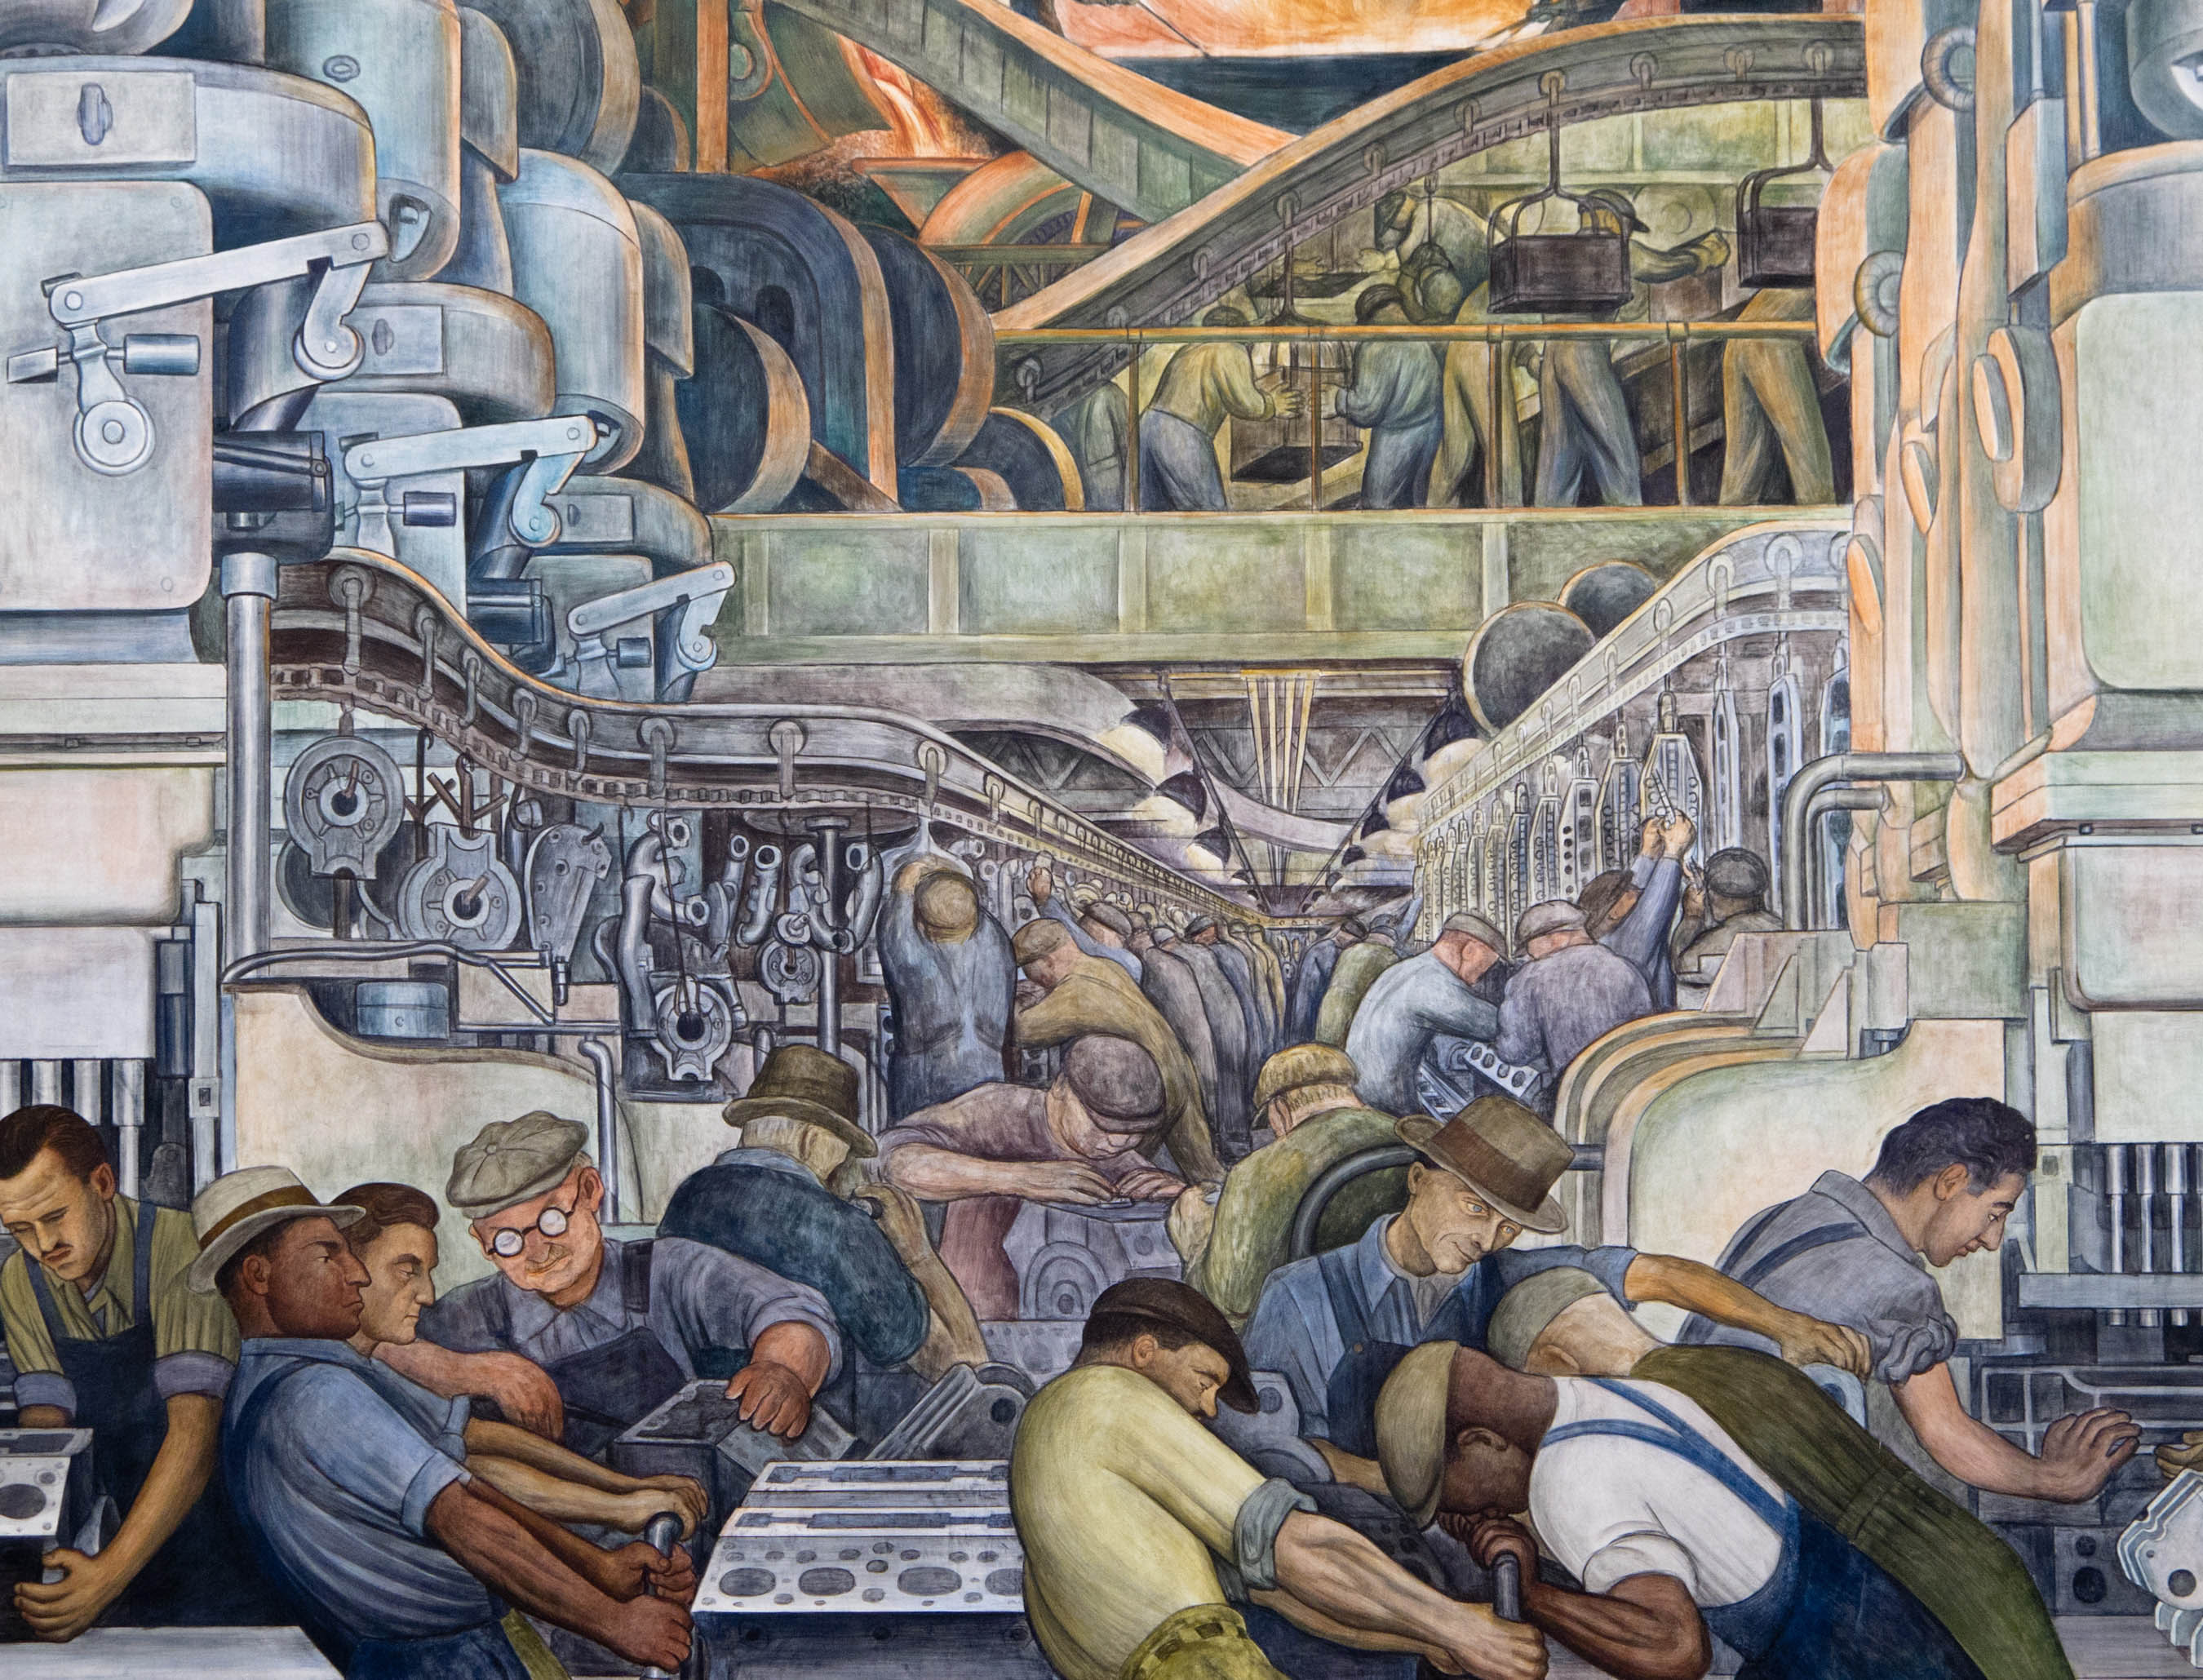 A painting by diego rivera